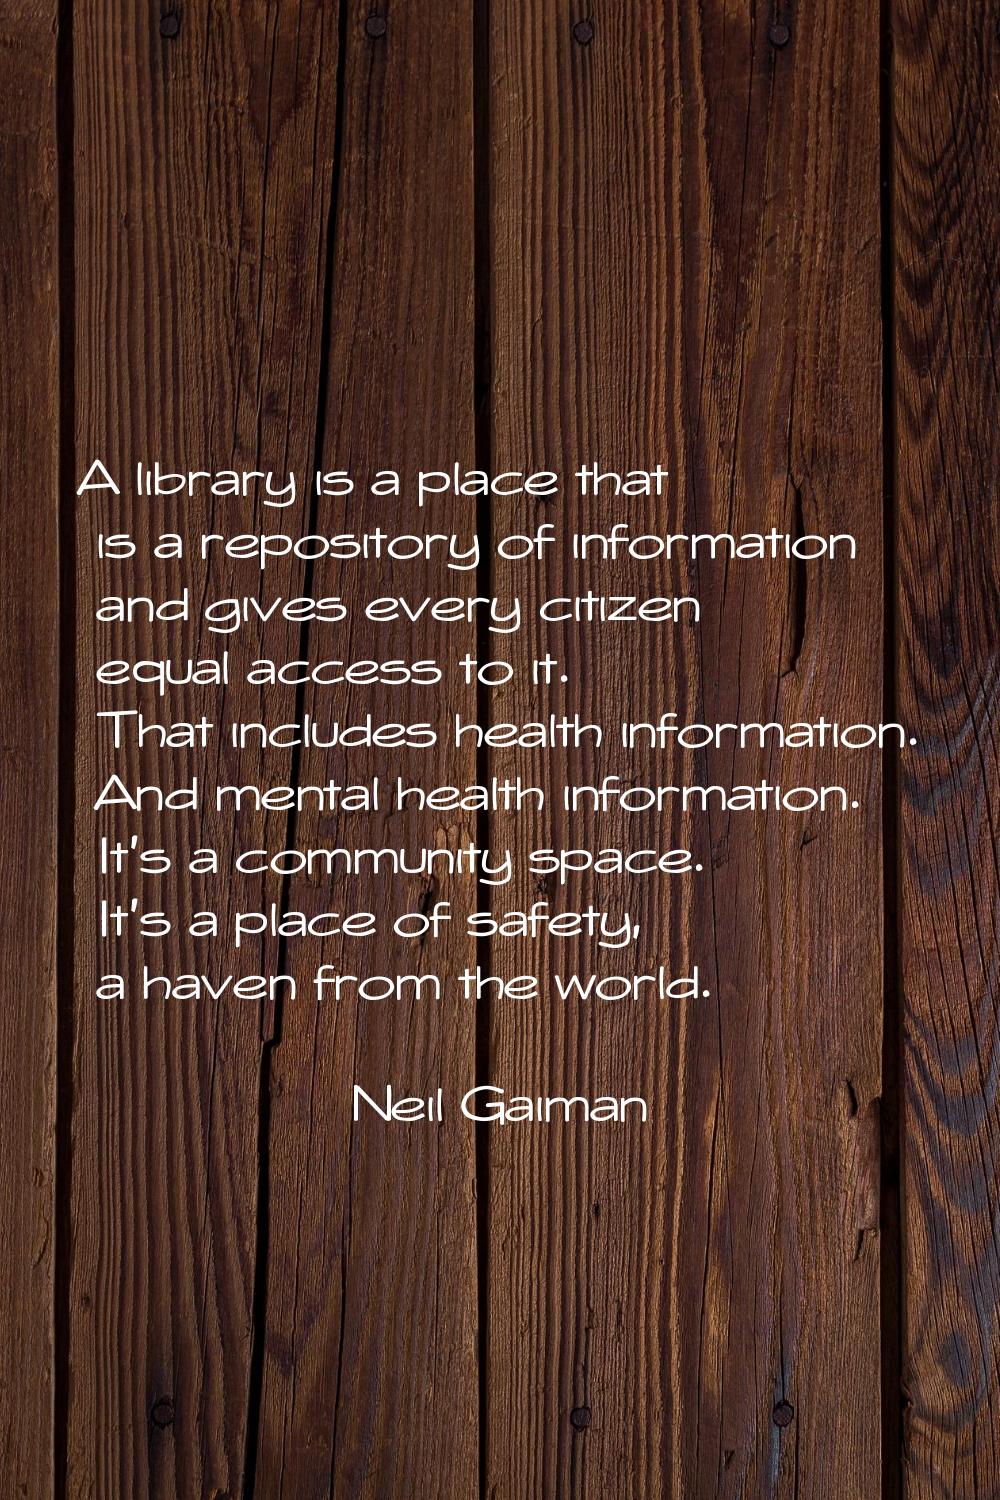 A library is a place that is a repository of information and gives every citizen equal access to it